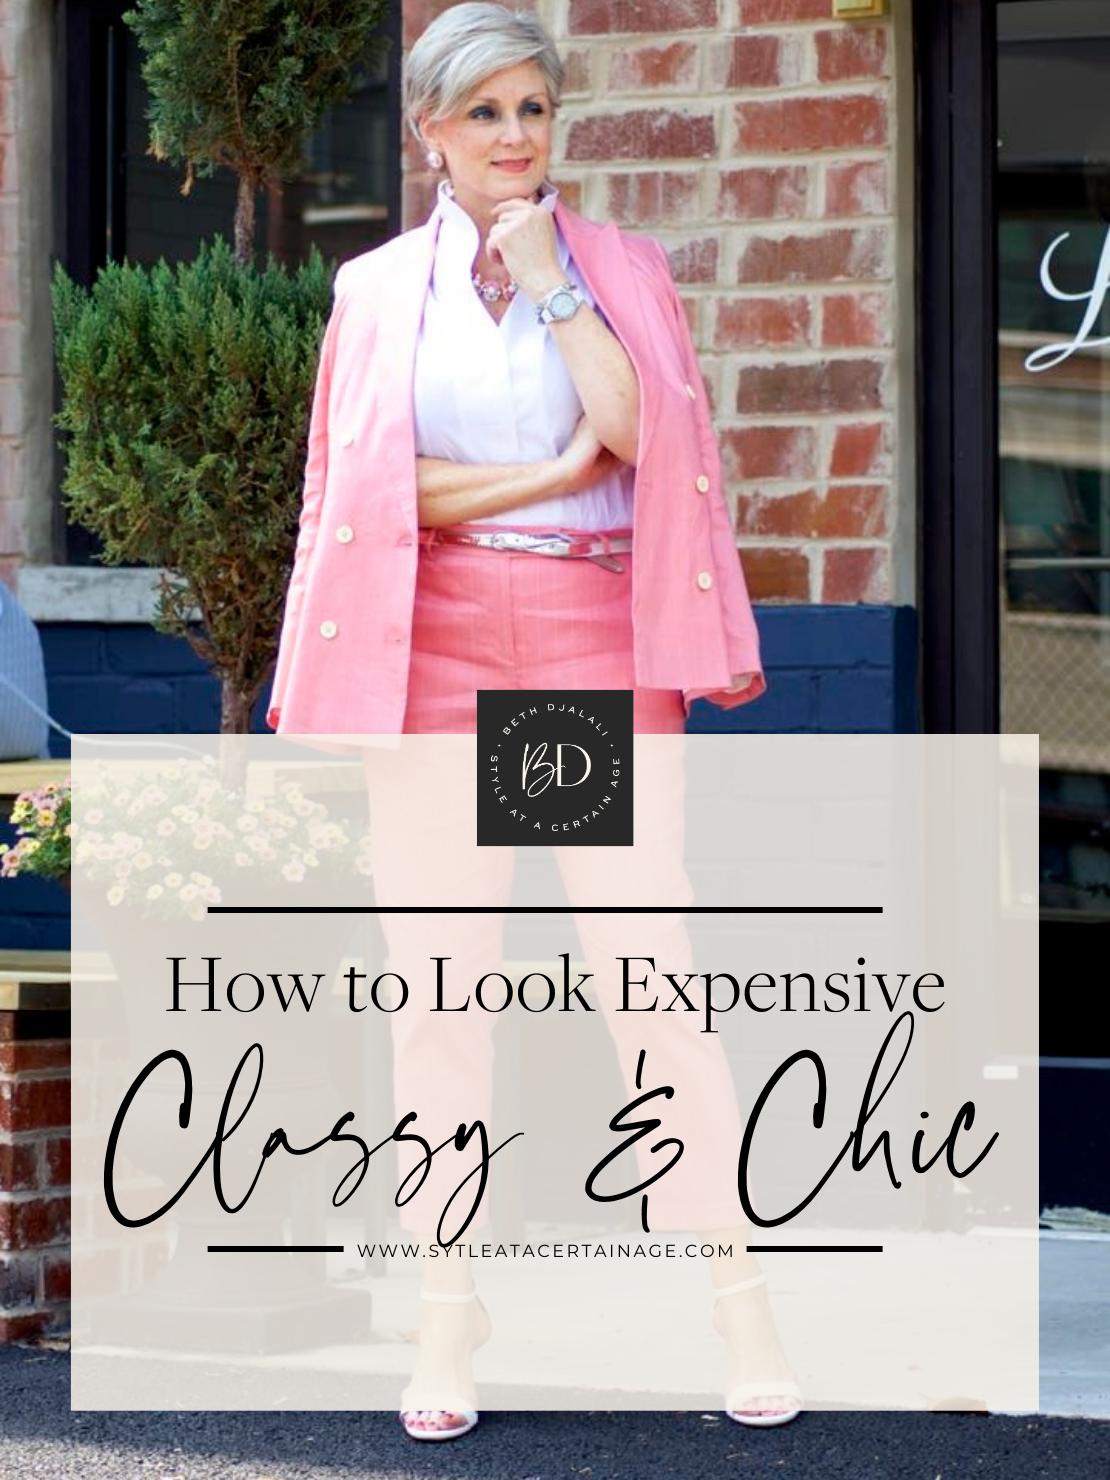 How to Look Expensive, Classy and Chic